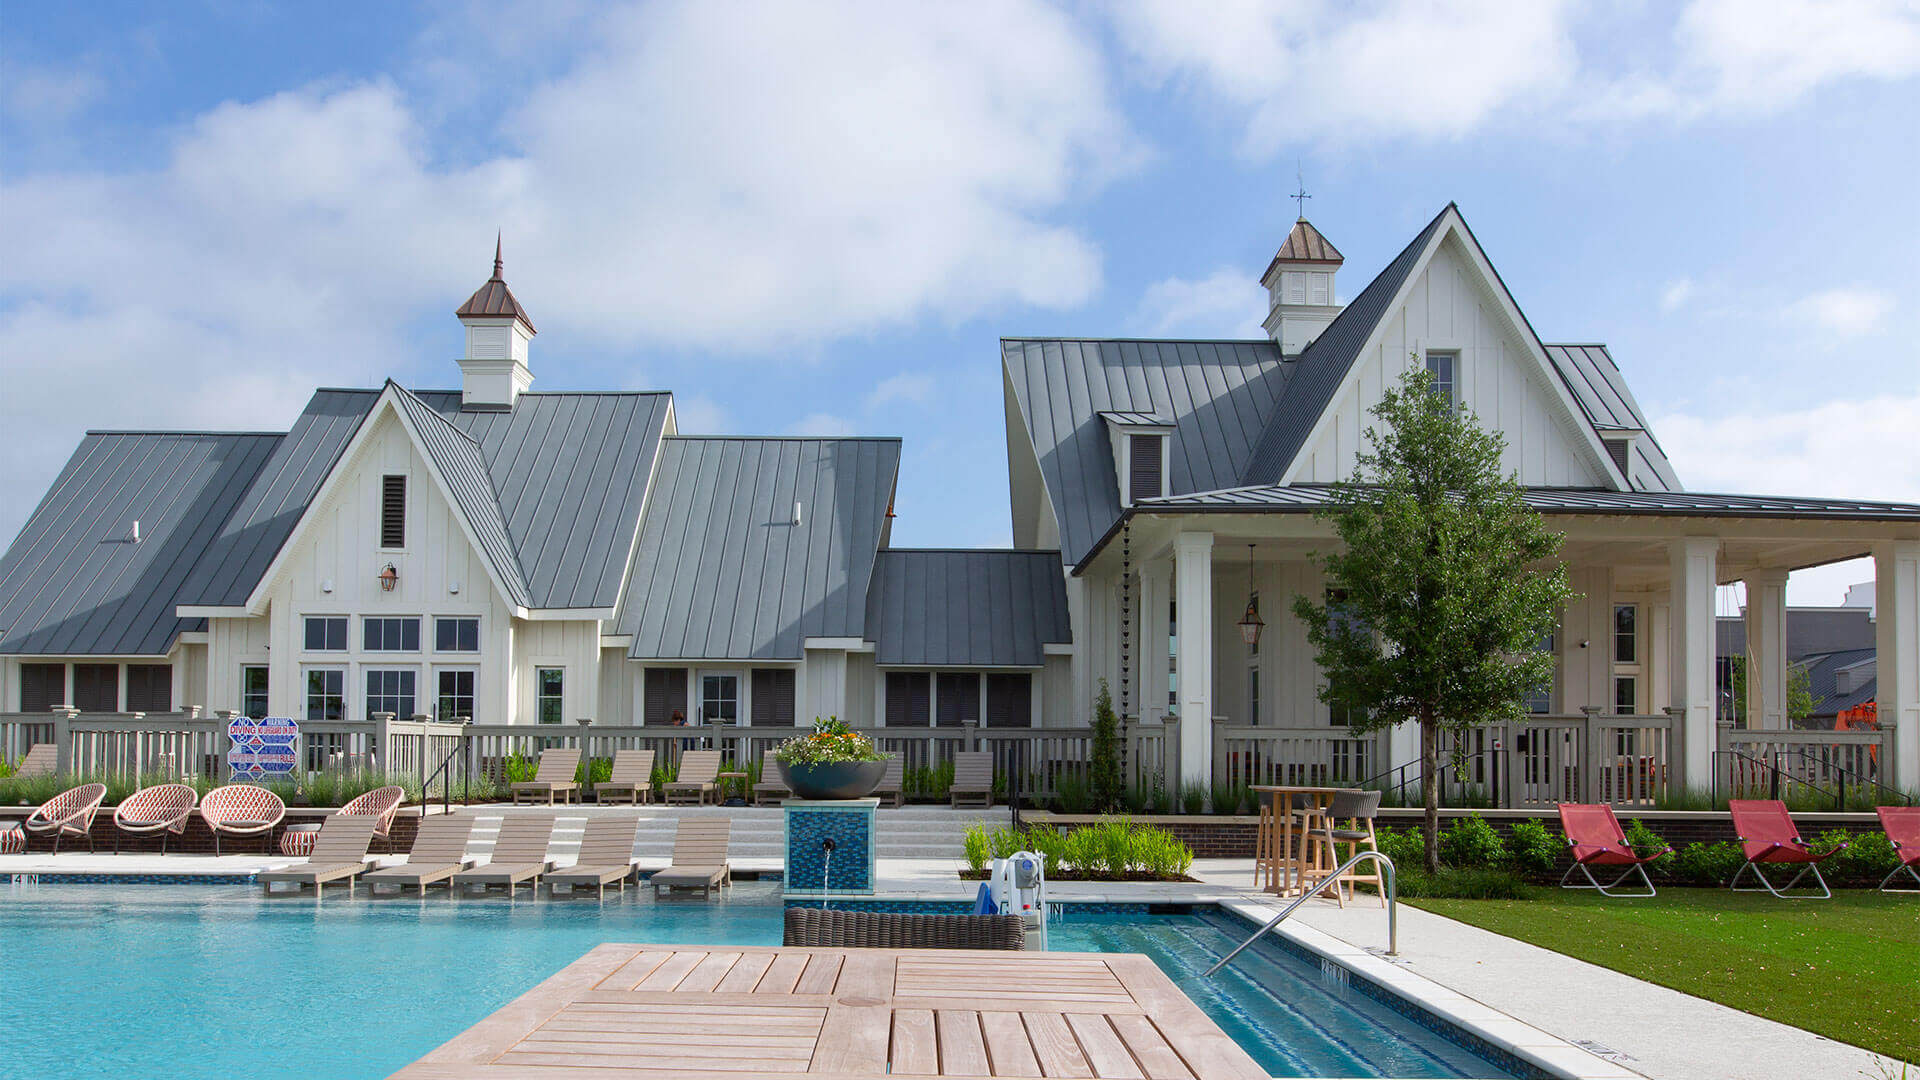 A clubhouse and swimming pool are shown at a Hillwood community development.